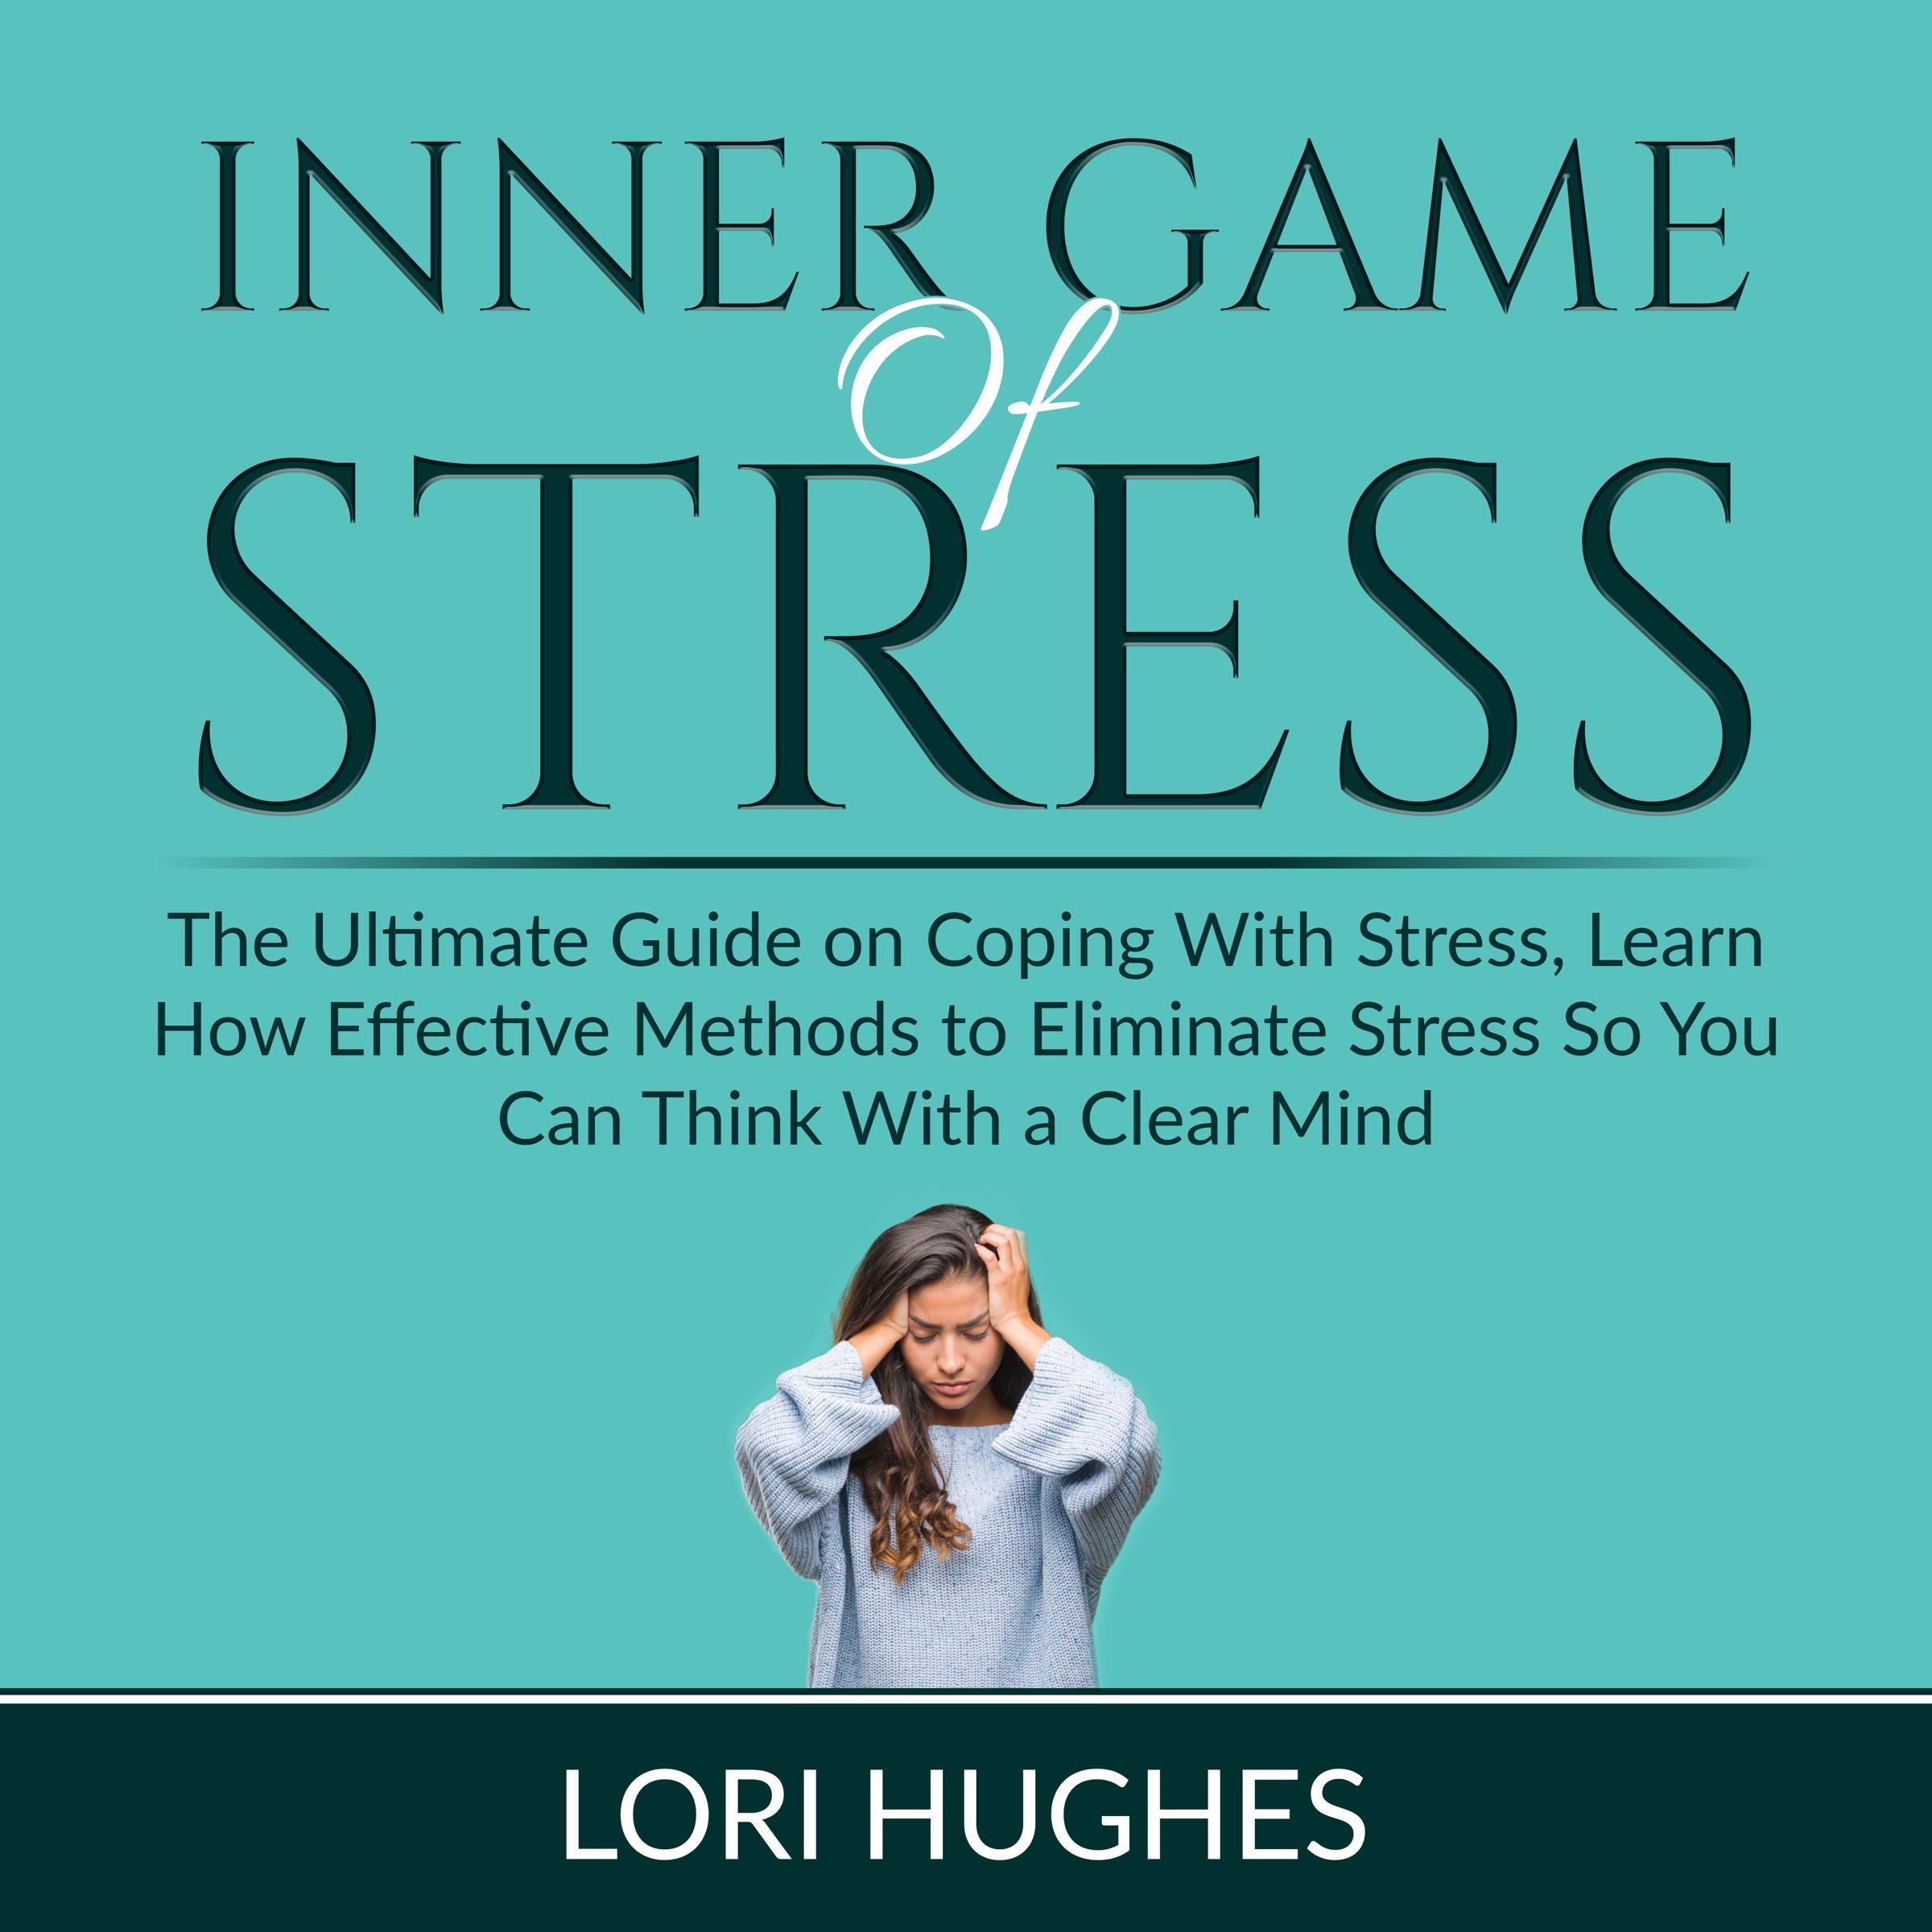 Inner Game of Stress: The Ultimate Guide on Coping With Stress, Learn How Effective Methods to Eliminate Stress So You Can Think With a Clear Mind